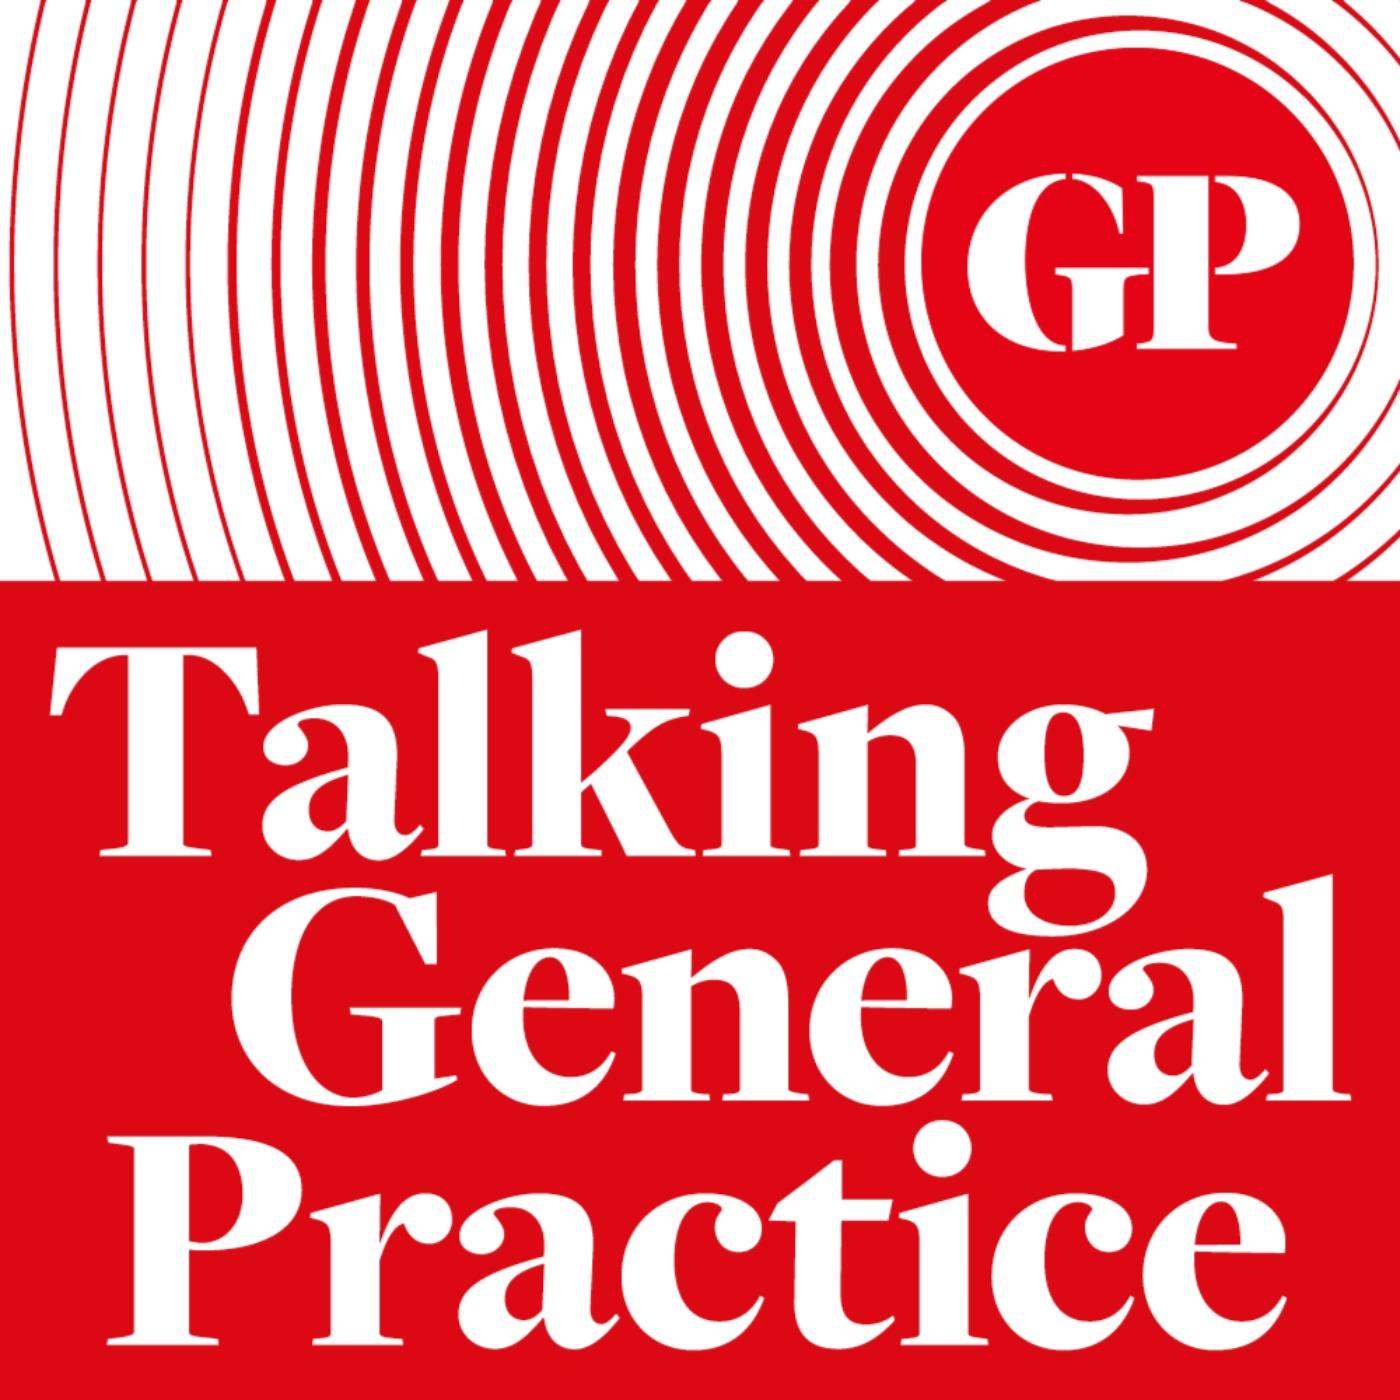 Thumbnail for "General practice in crisis, a defining week for the GPC, and veterans' health".